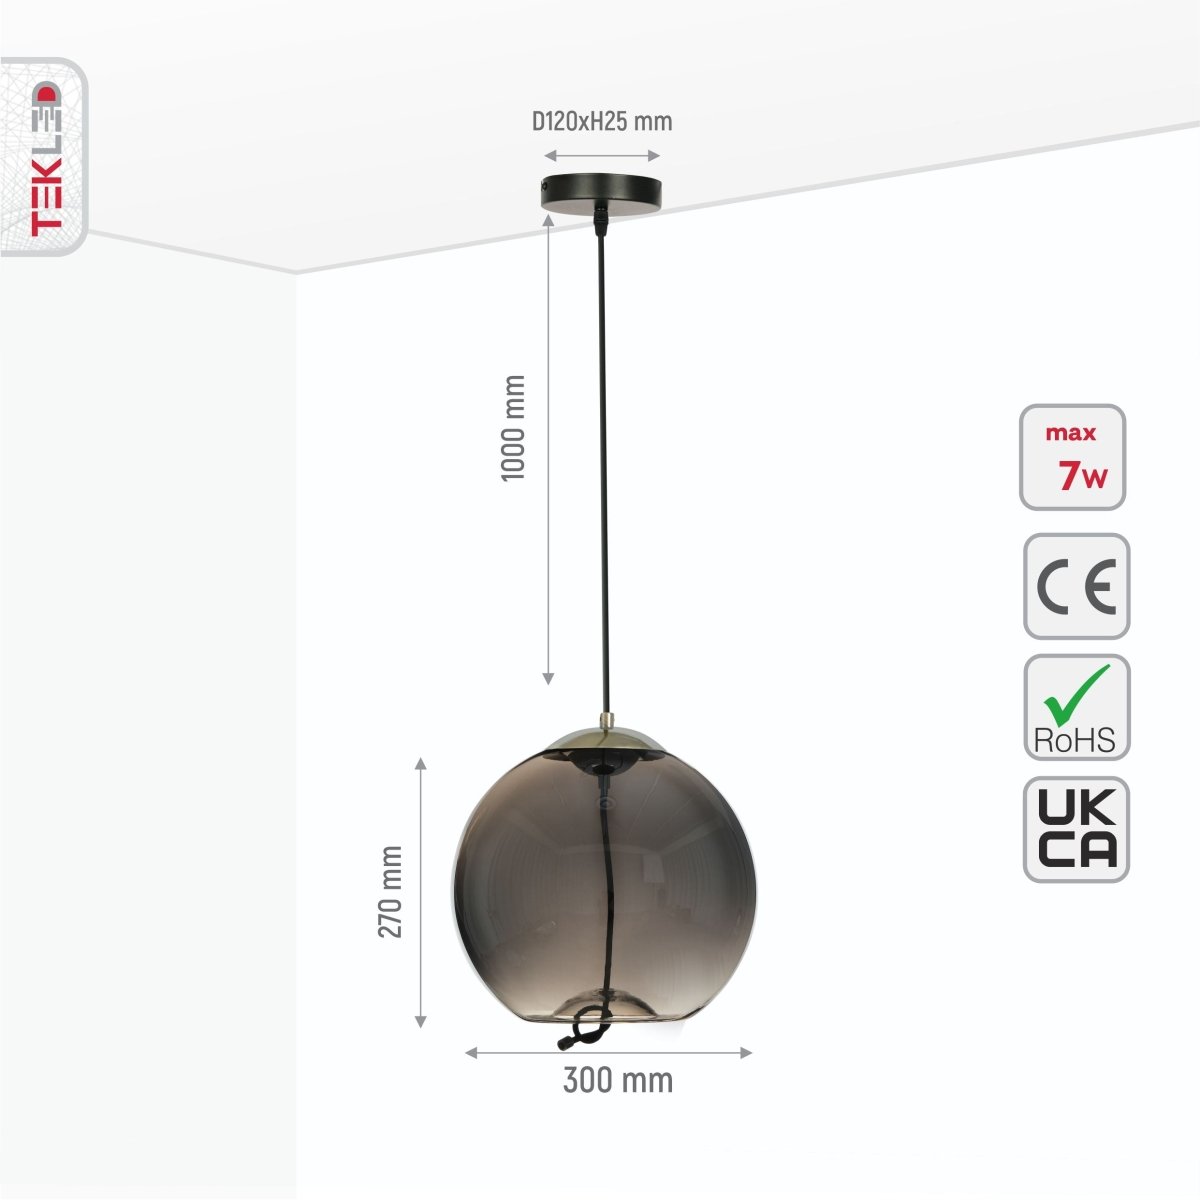 Size and specs of Smoky Glass Globe Pendant Light with G9 Fitting | TEKLED 159-17334